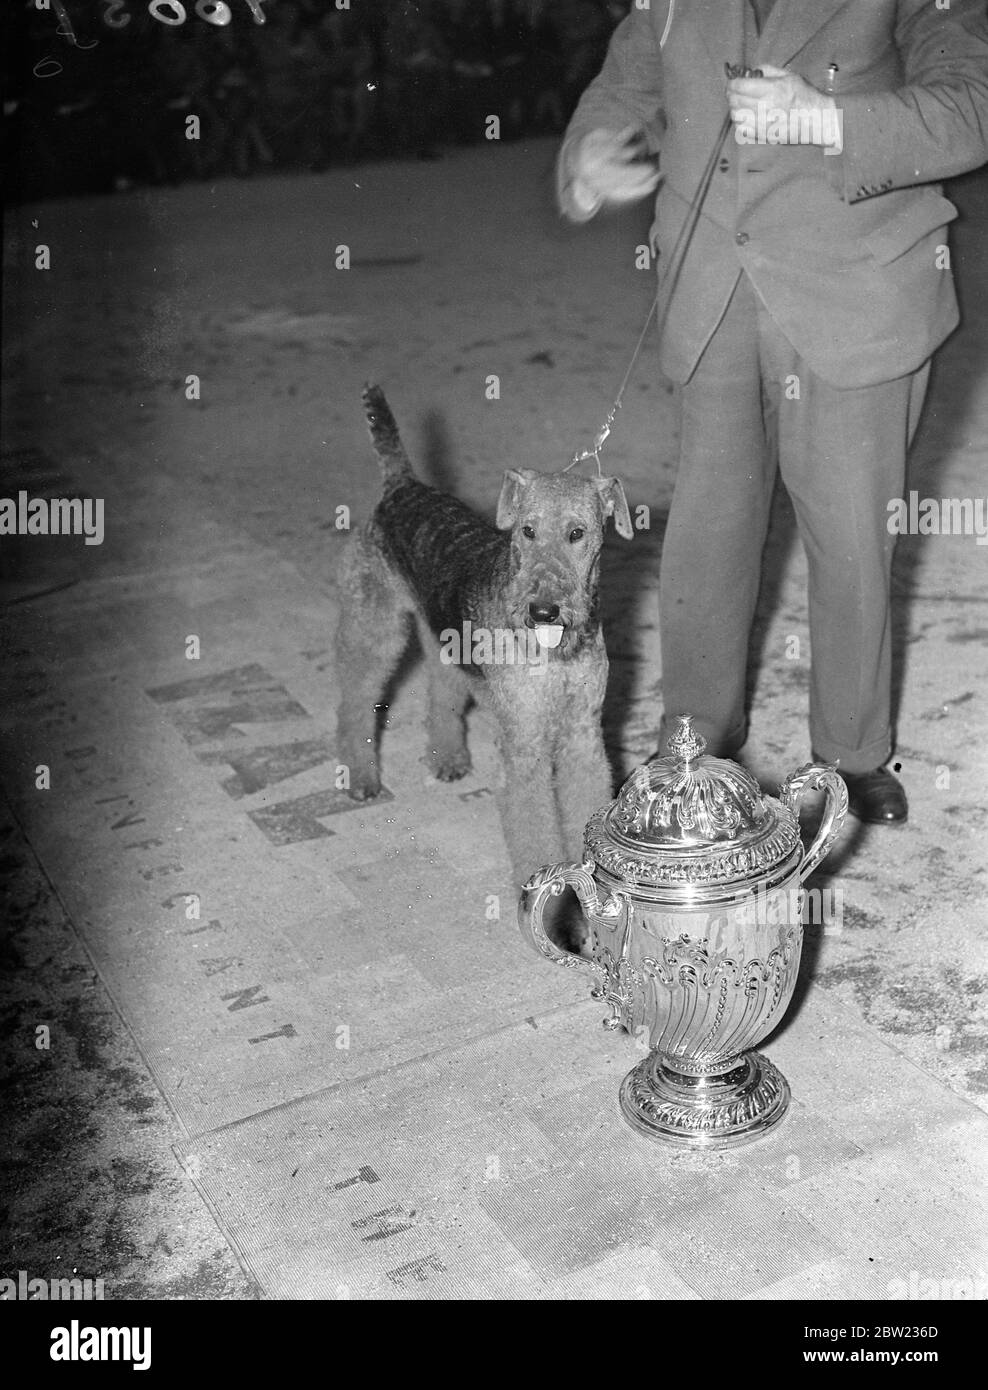 Shelterook Merry Sovereign an airdale owned by Mr S.m Stewart, was judged best dog at the kennel clubs show, Olympia, London. Over 3000 dogs were on view. 6 October 1937. Stock Photo